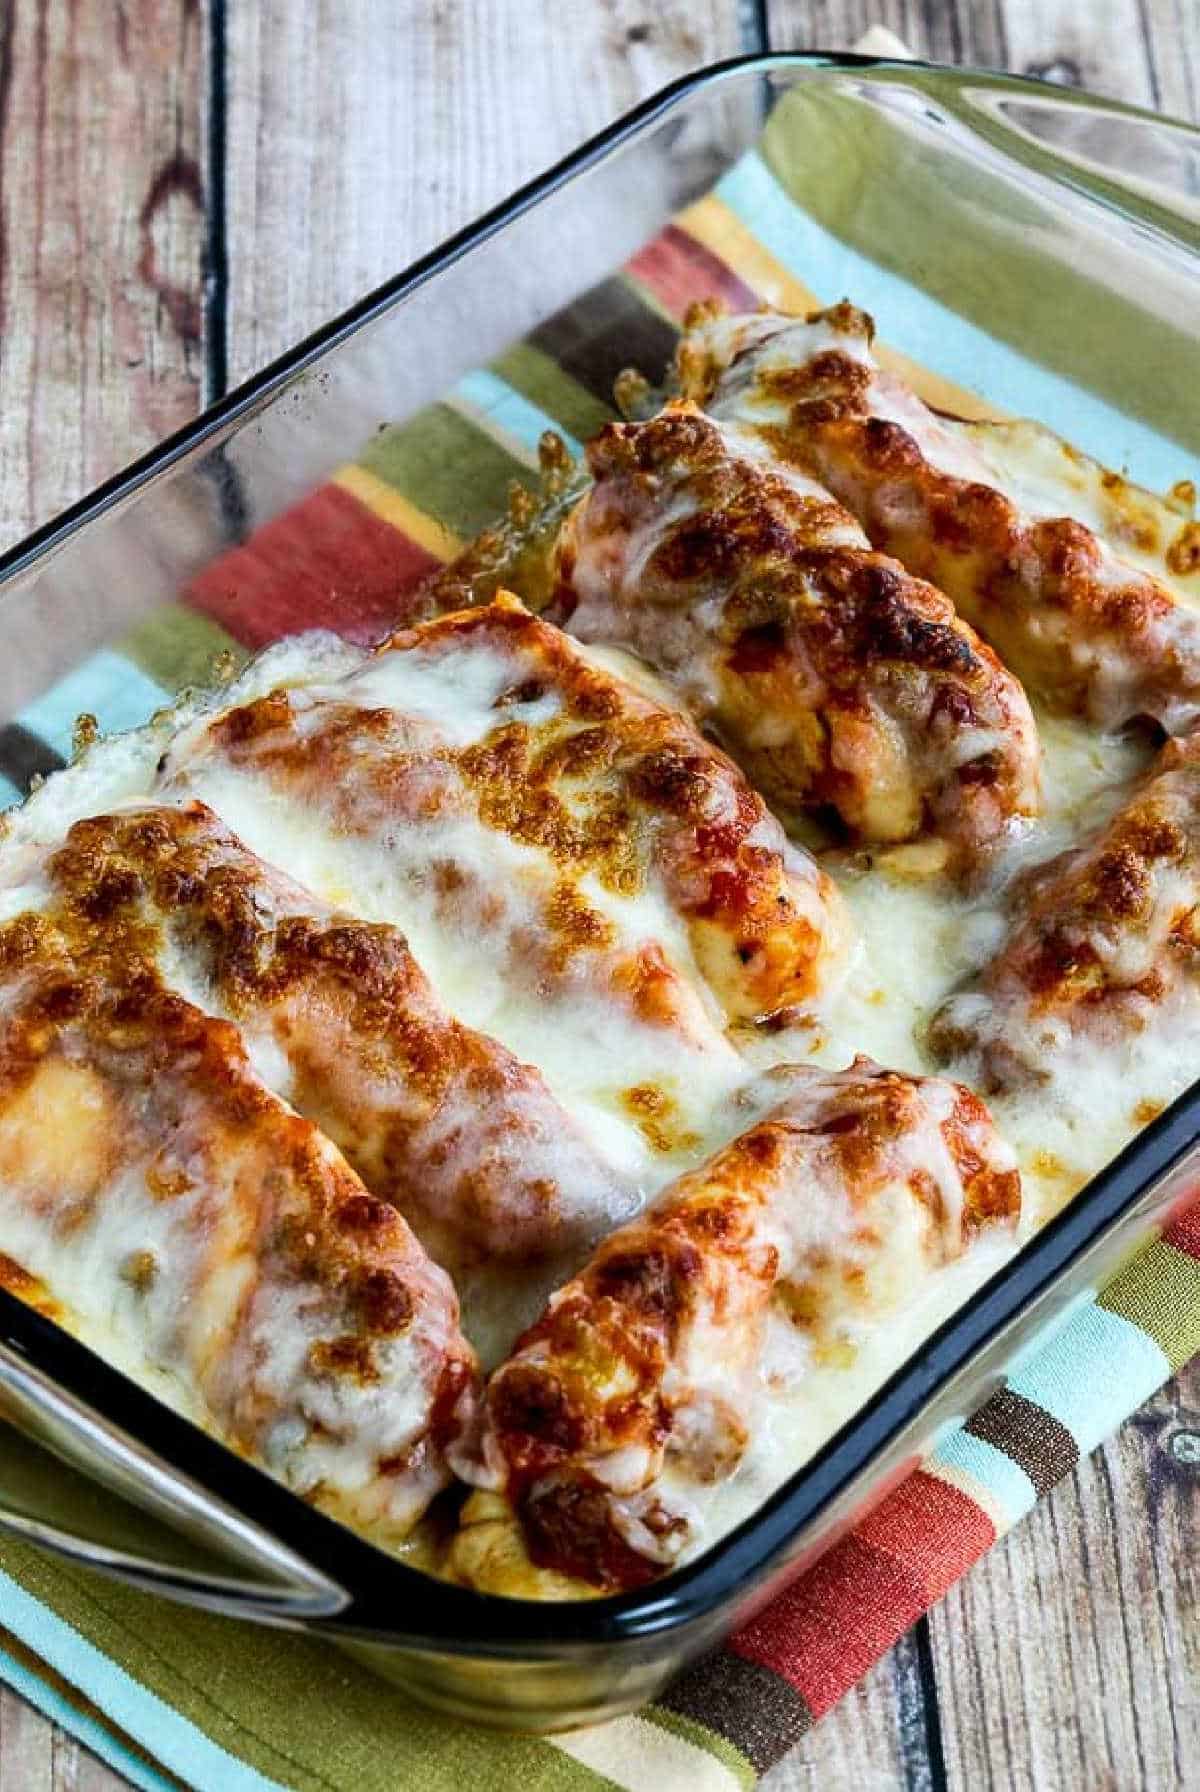 Instant Pot Salsa Chicken shown in baking dish with melted cheese